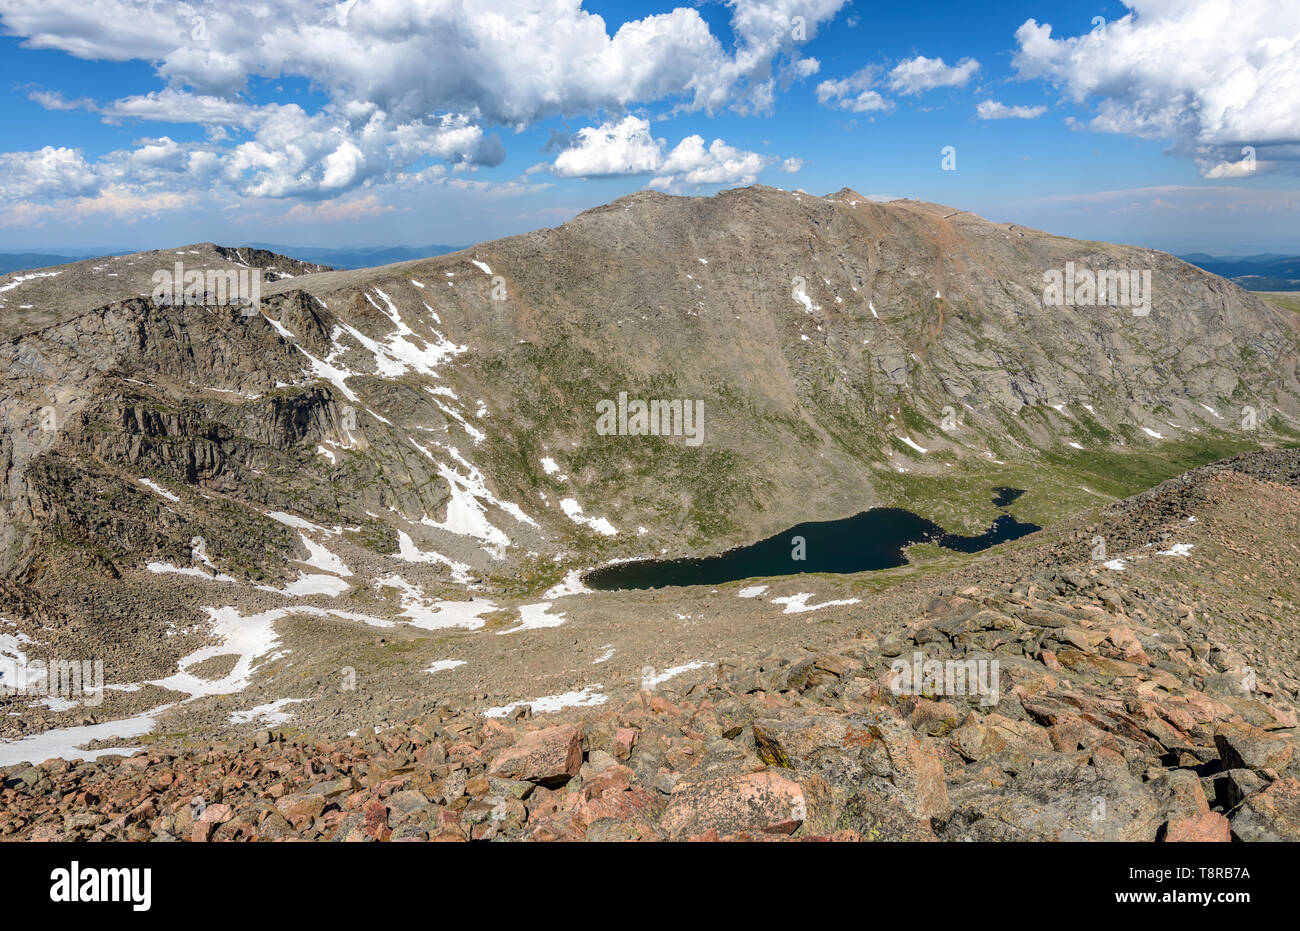 Mount Evans - Southwest face of Mount Evens, seen from summit of Mount Bierstadt, Front Range of Rocky Mountains, Colorado, USA. Stock Photo